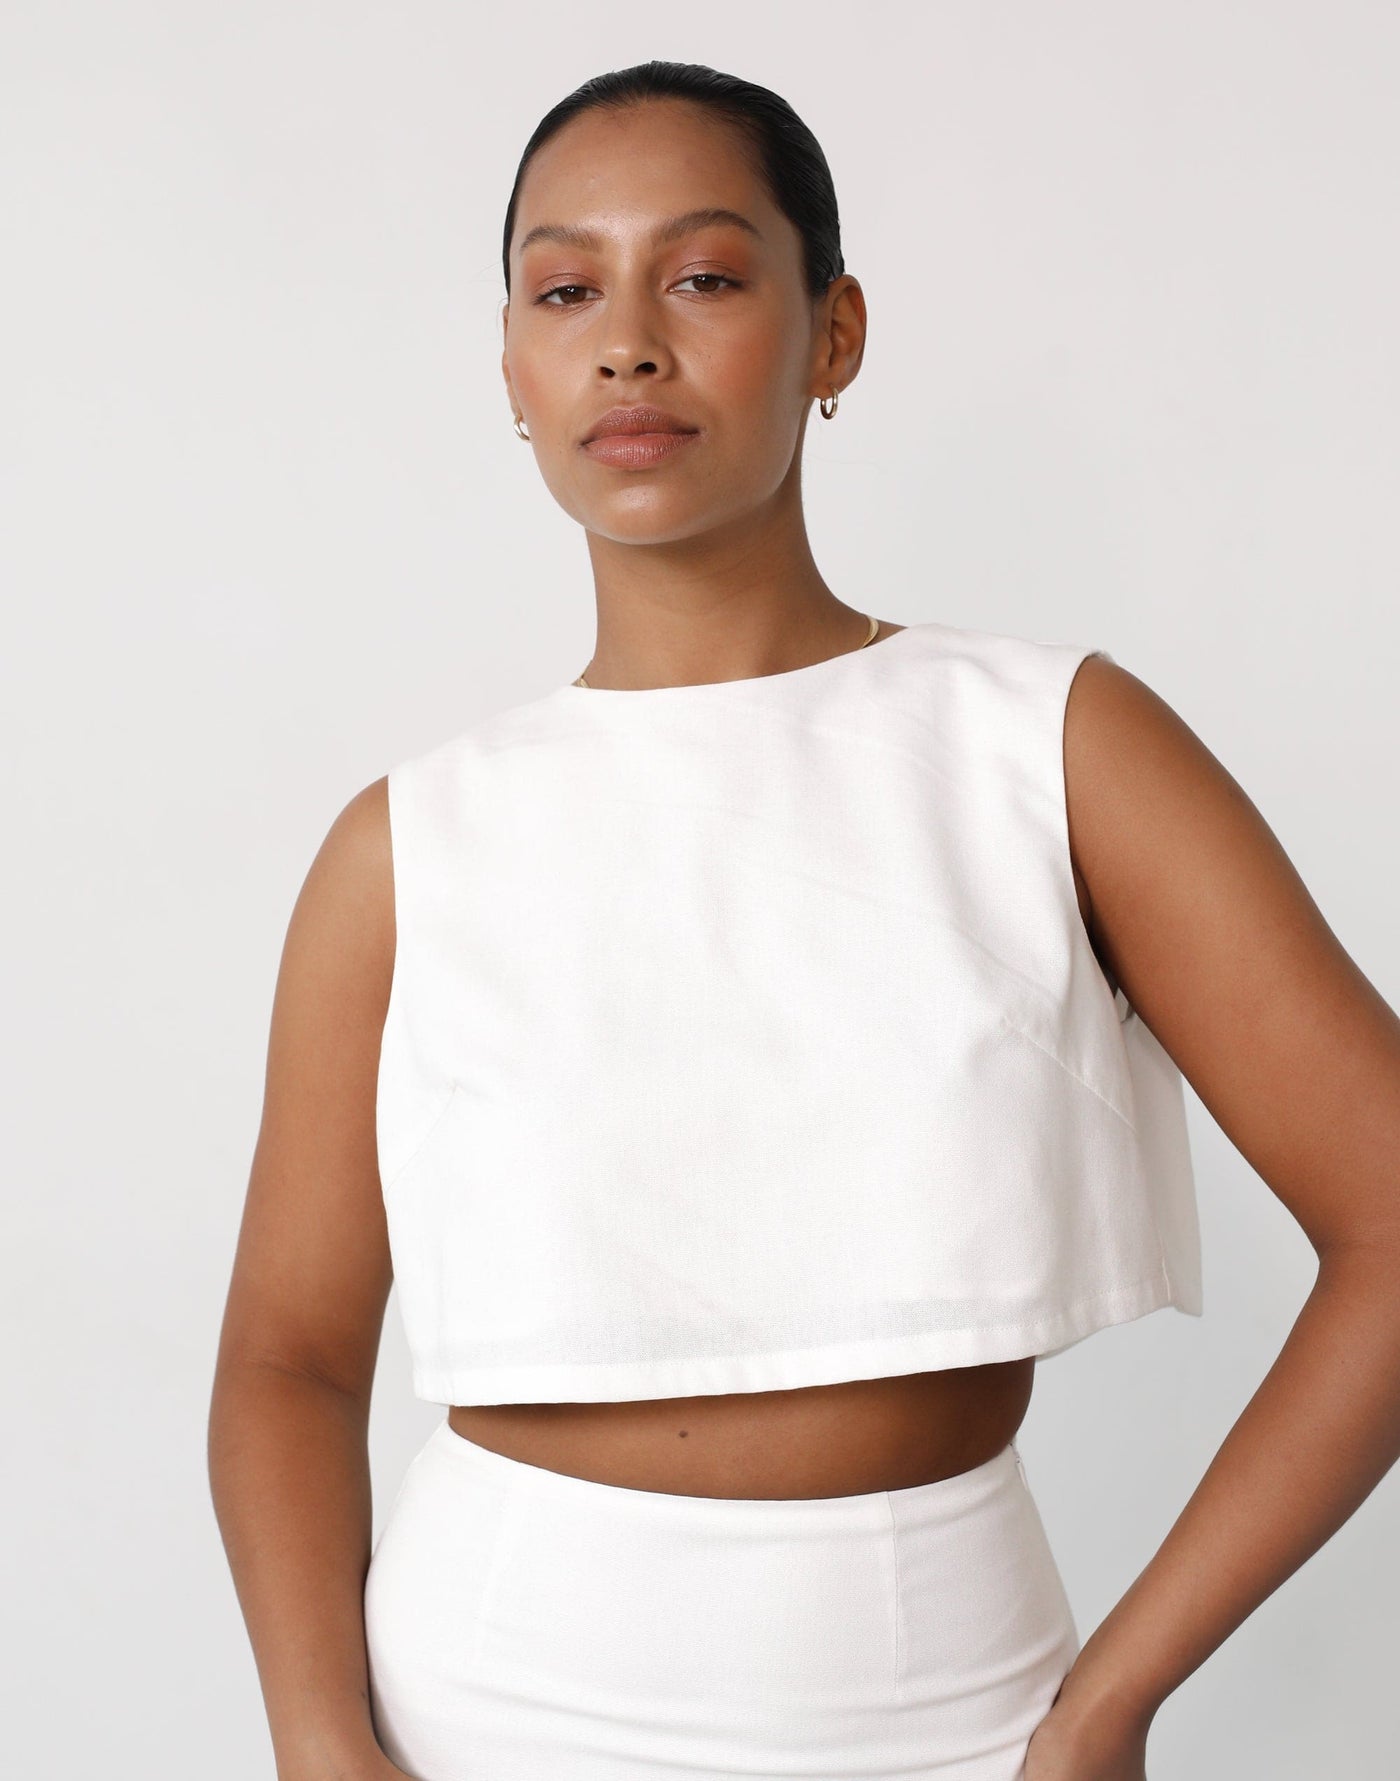 Sincerity Linen Top (White) - White Top - Women's Top - Charcoal Clothing